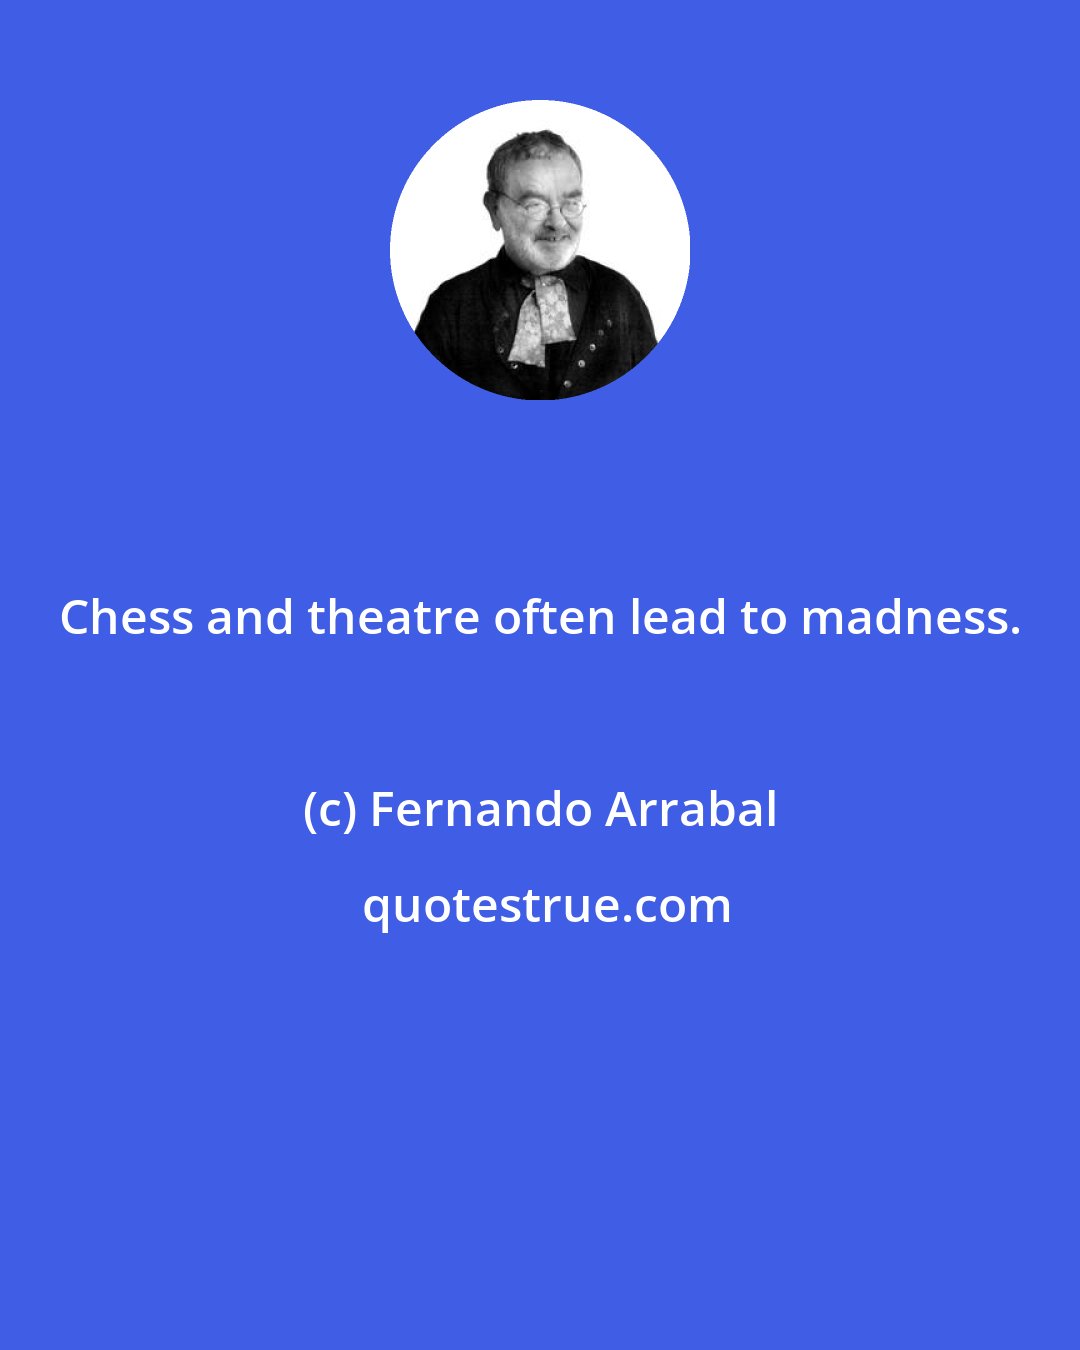 Fernando Arrabal: Chess and theatre often lead to madness.